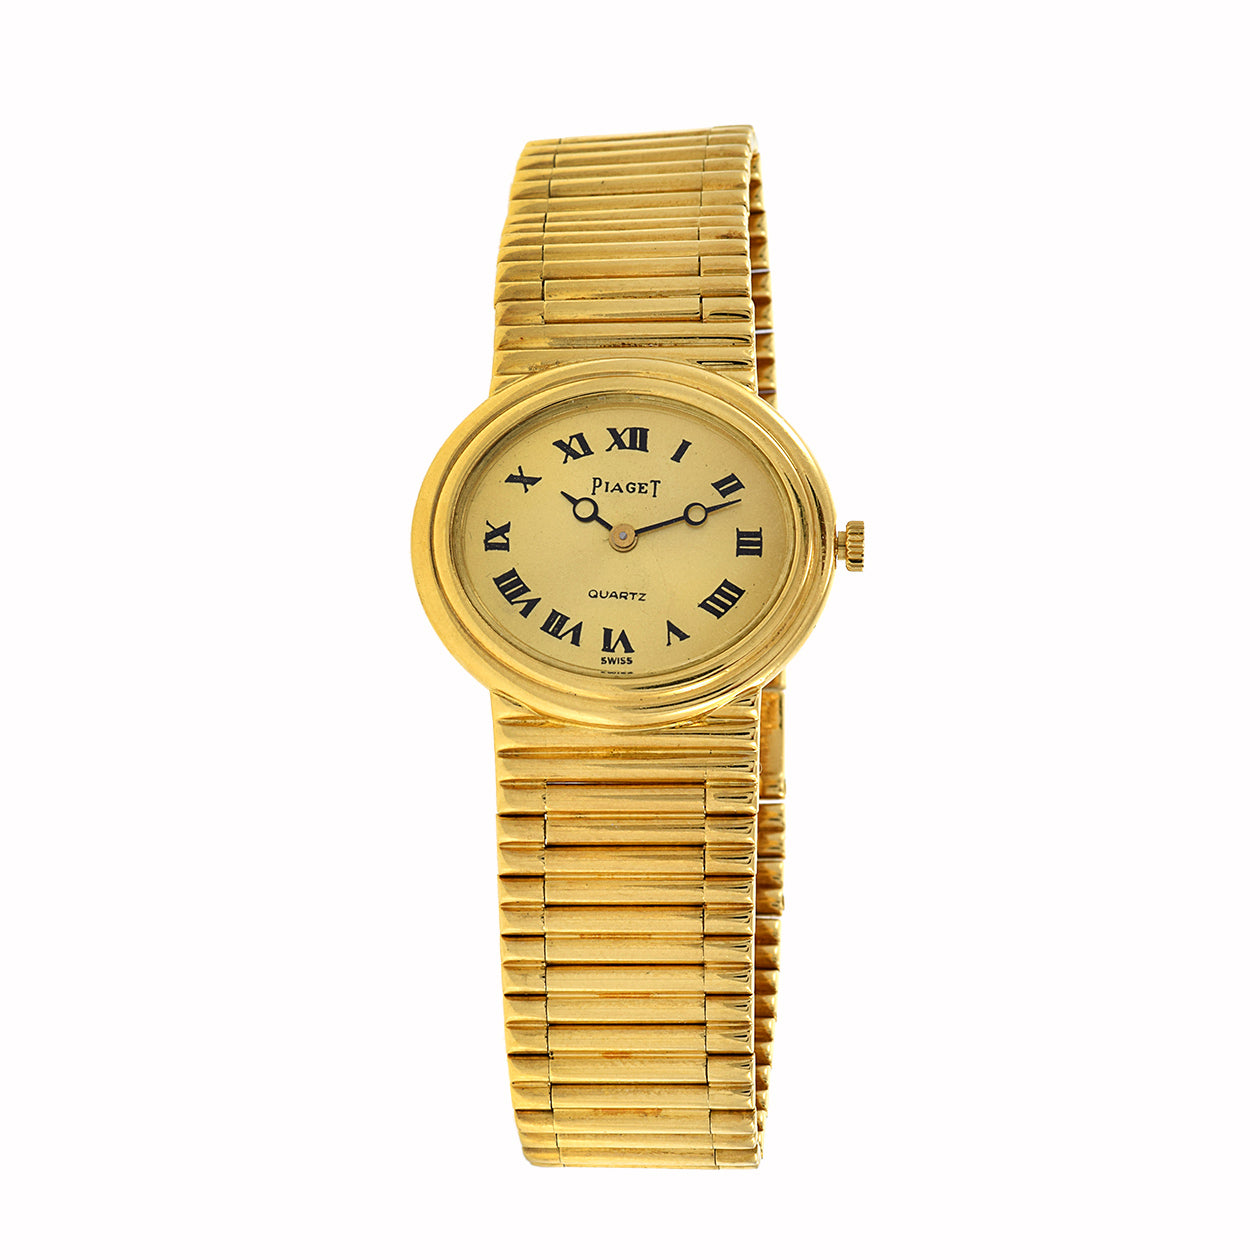 Vintage 1980's Piaget 18Kt Yellow Gold Watch